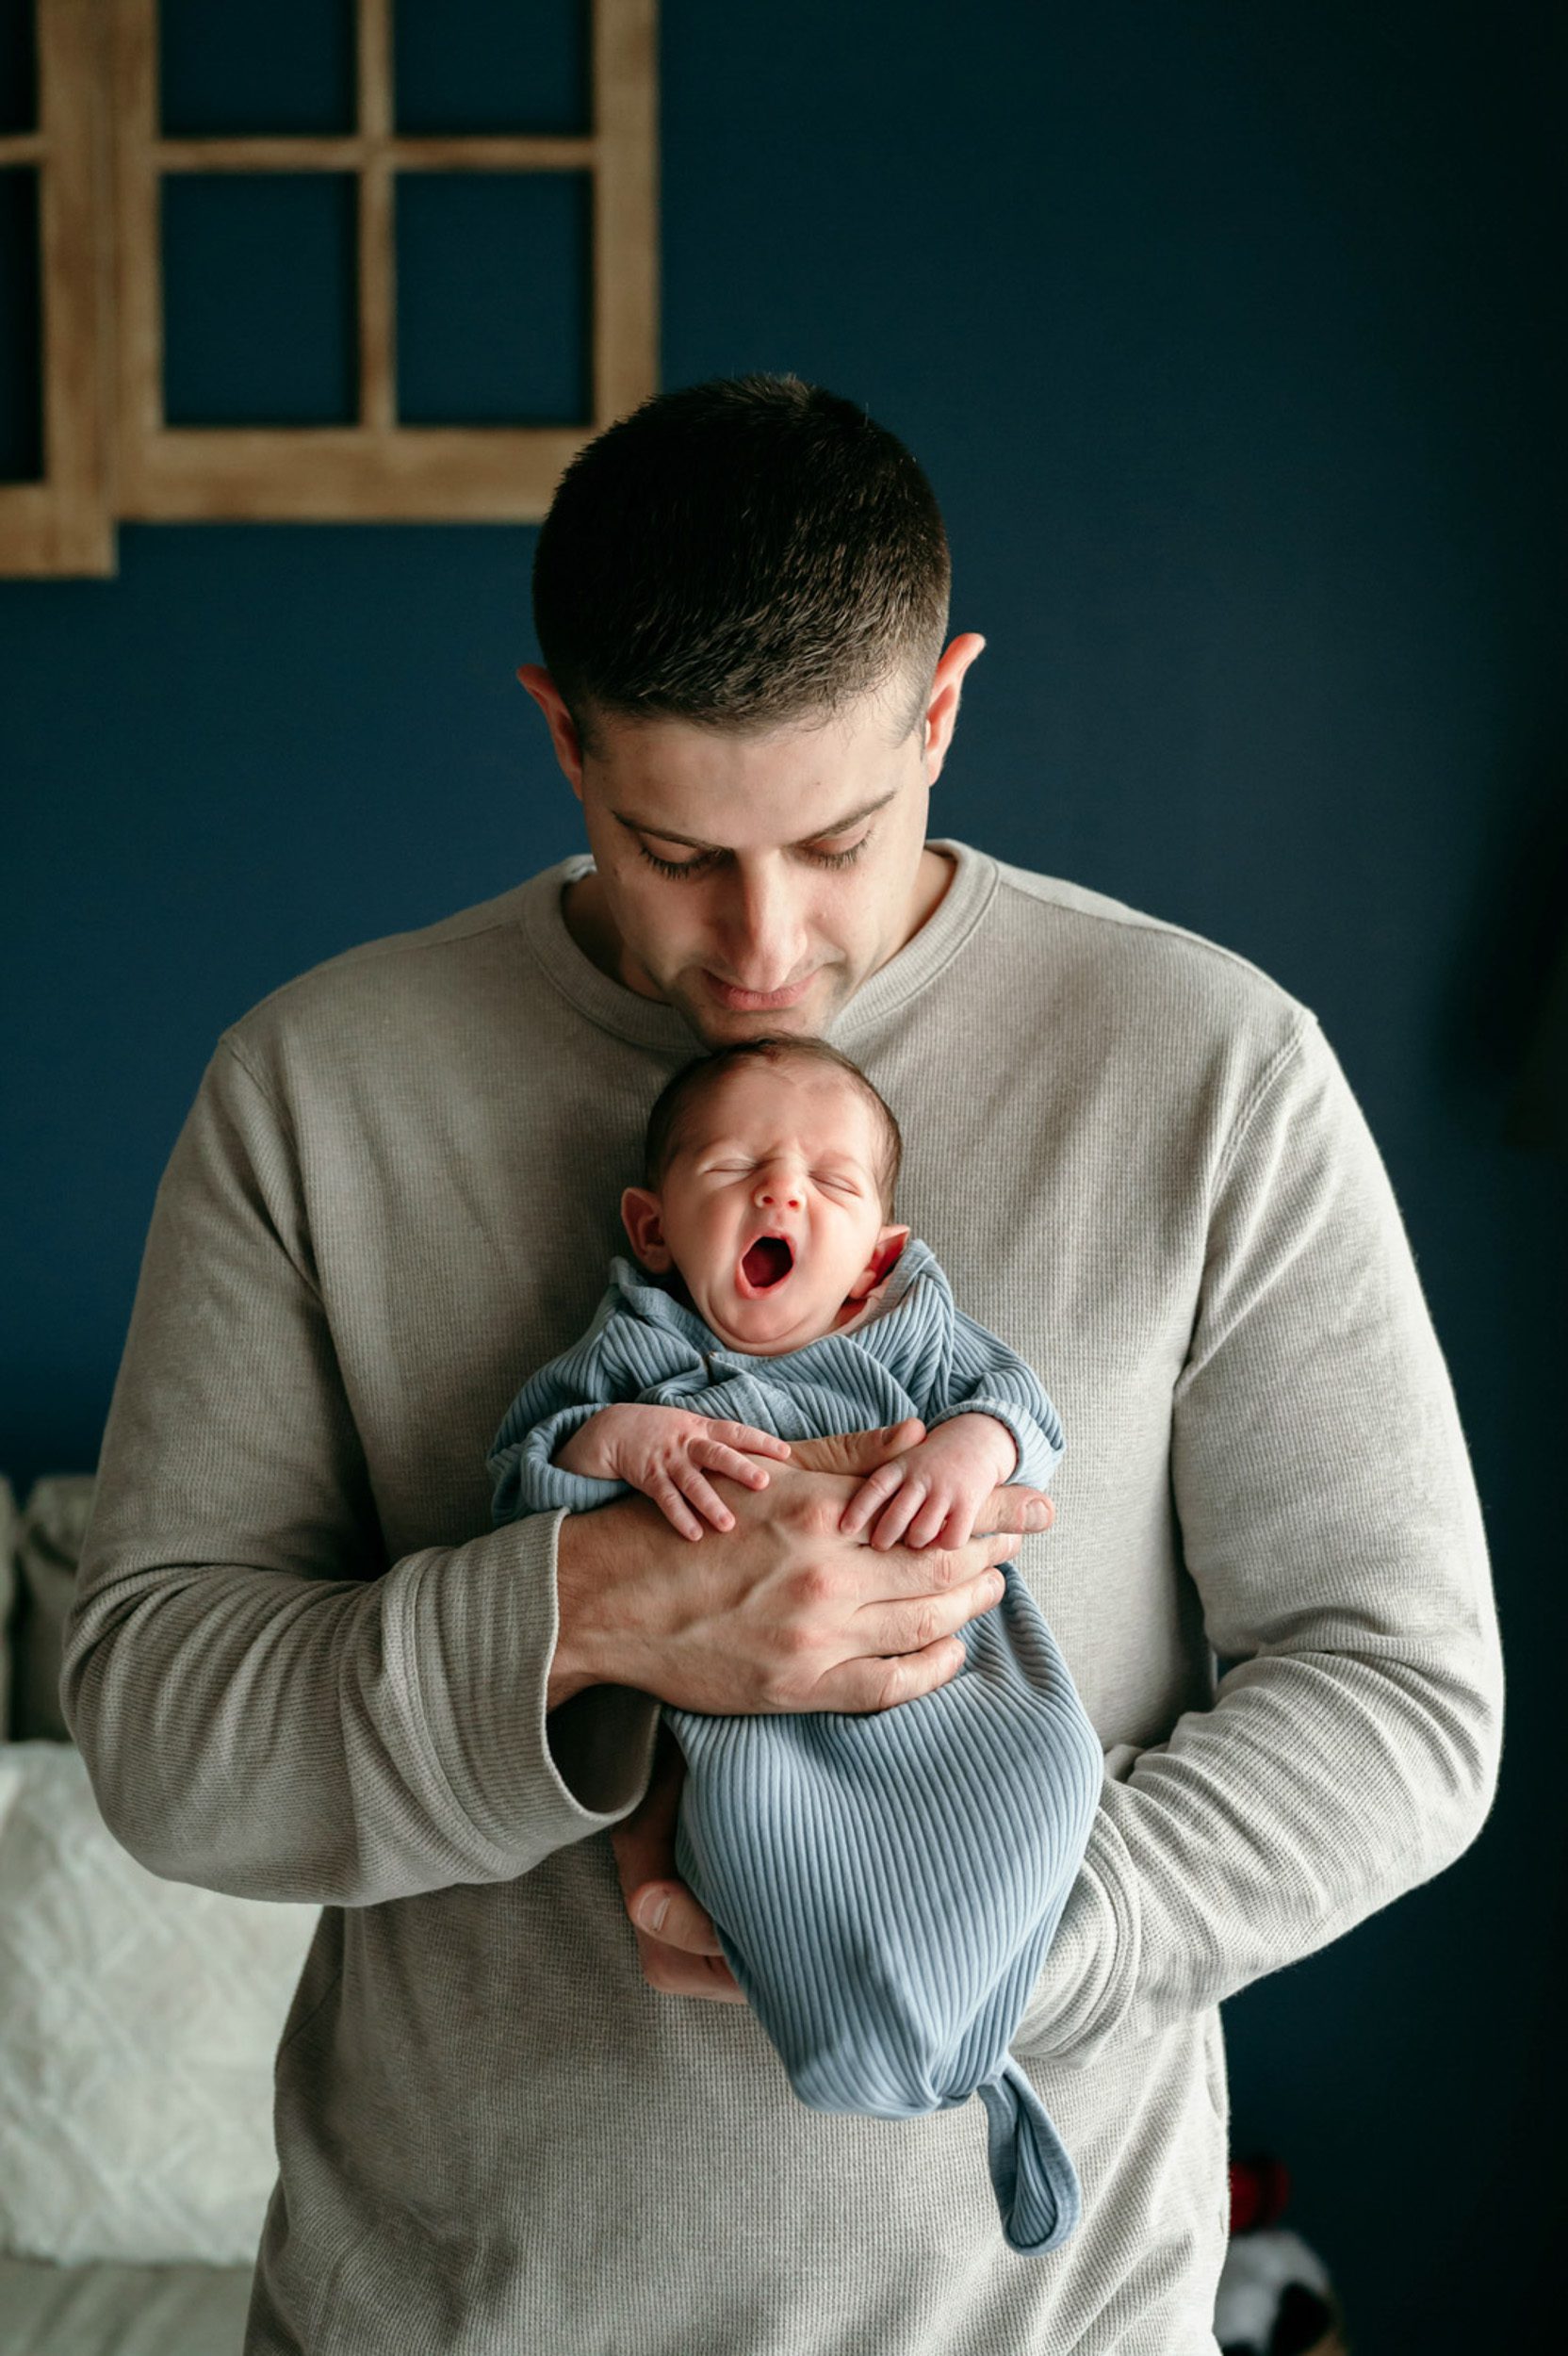 Newborn photo of a baby boy yawning while his dad holds him against his chest during an in home newborn photography session